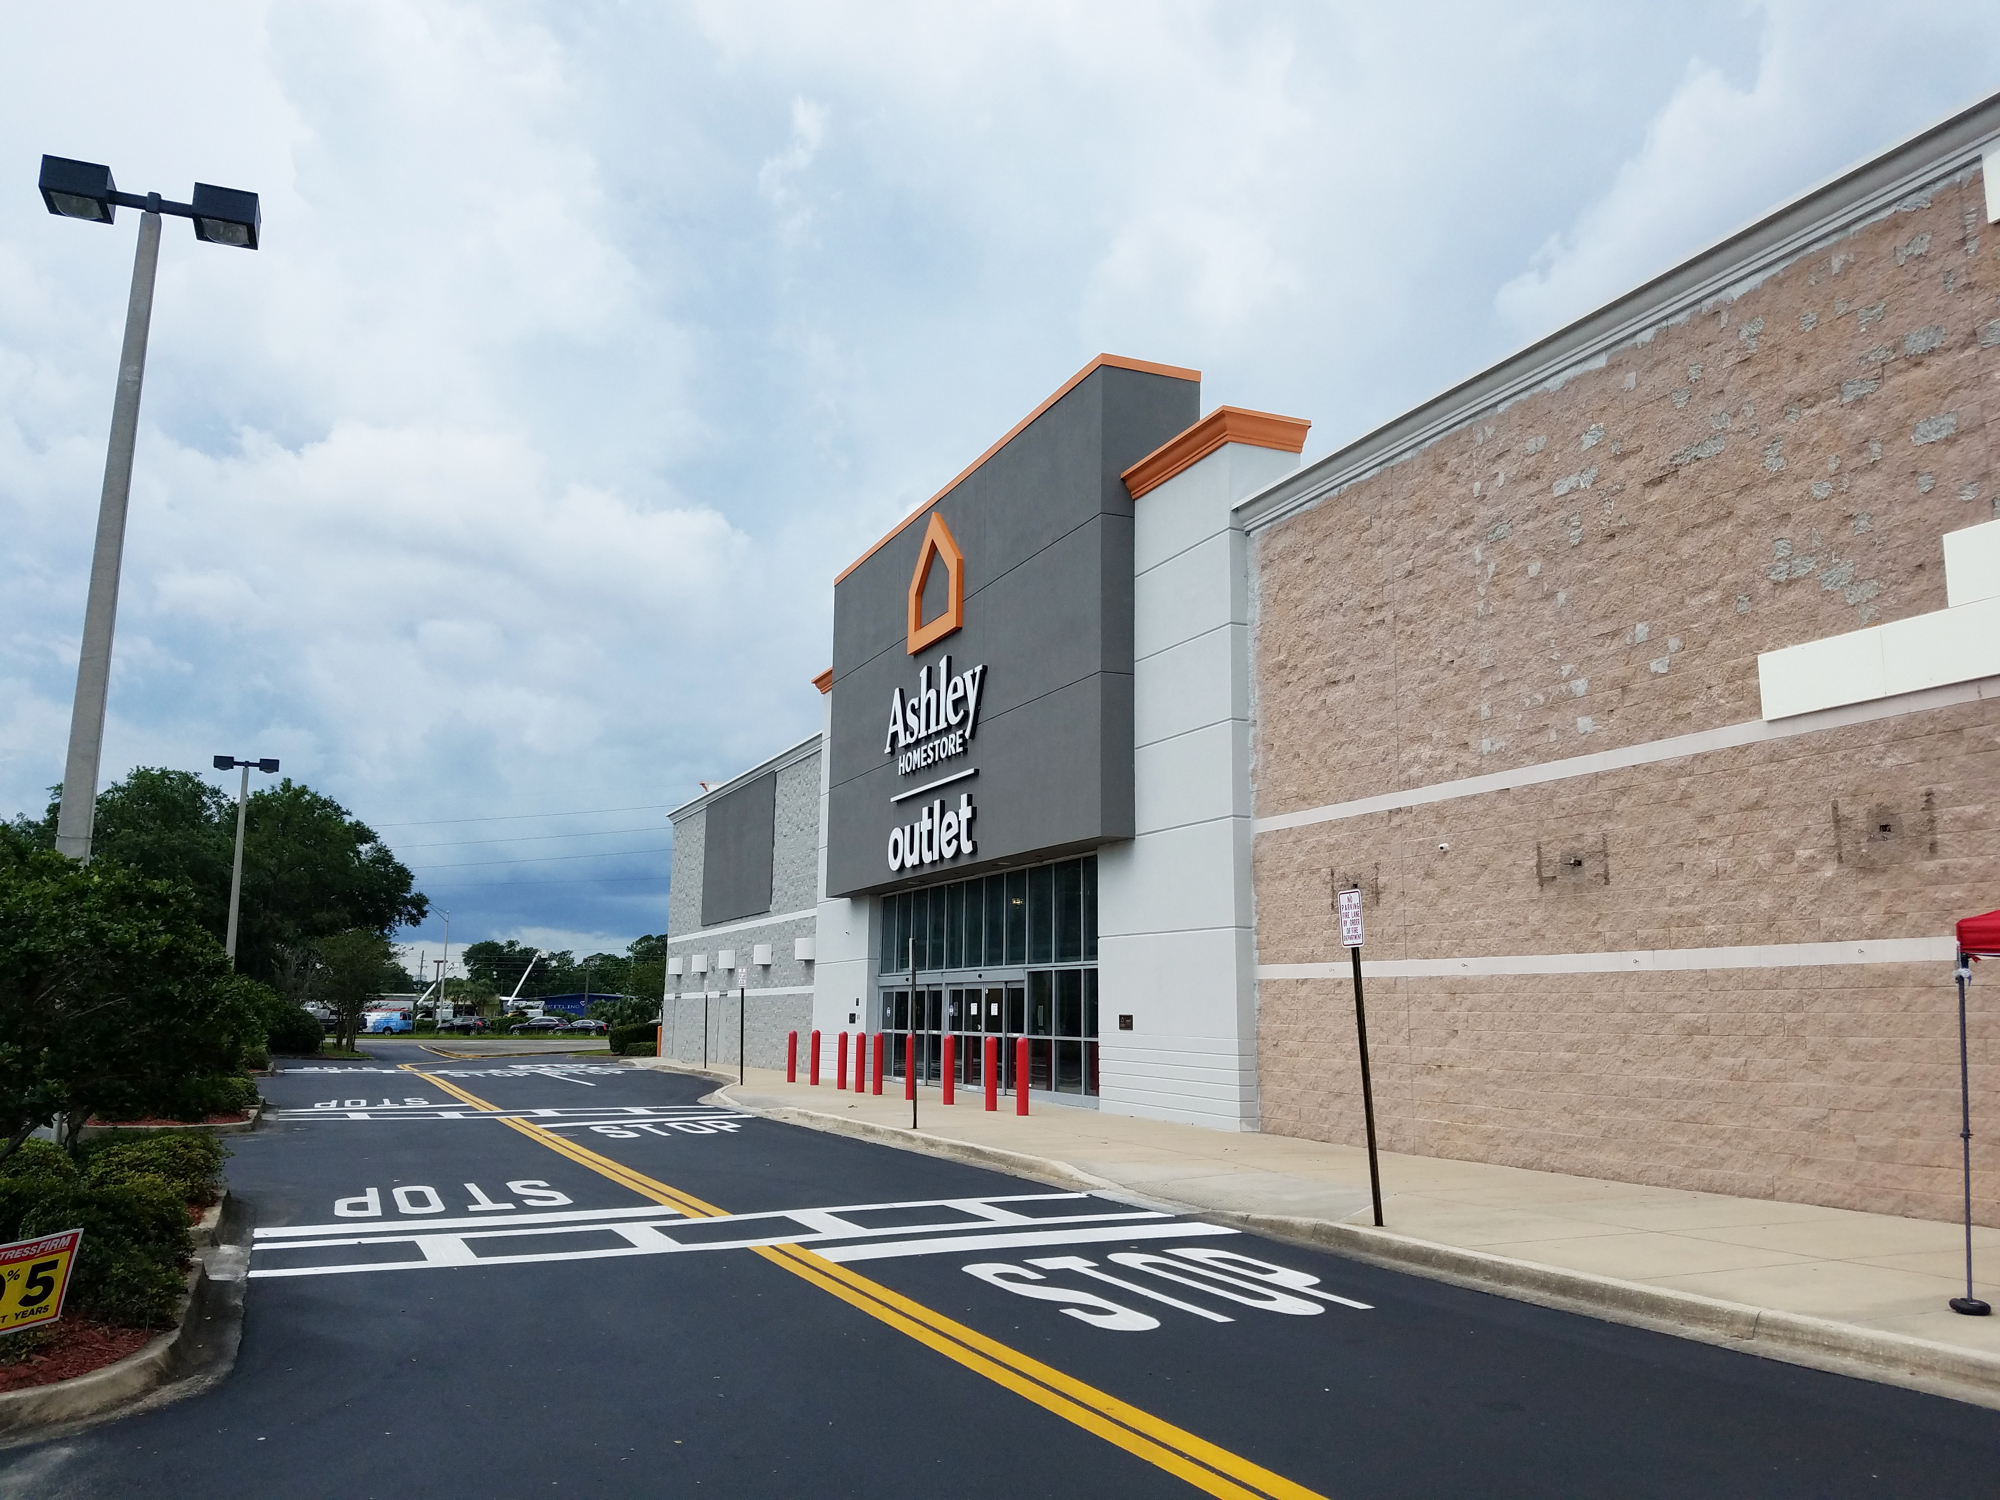 CB Square is anchored by Aldi and Ashley HomeStore Outlet.